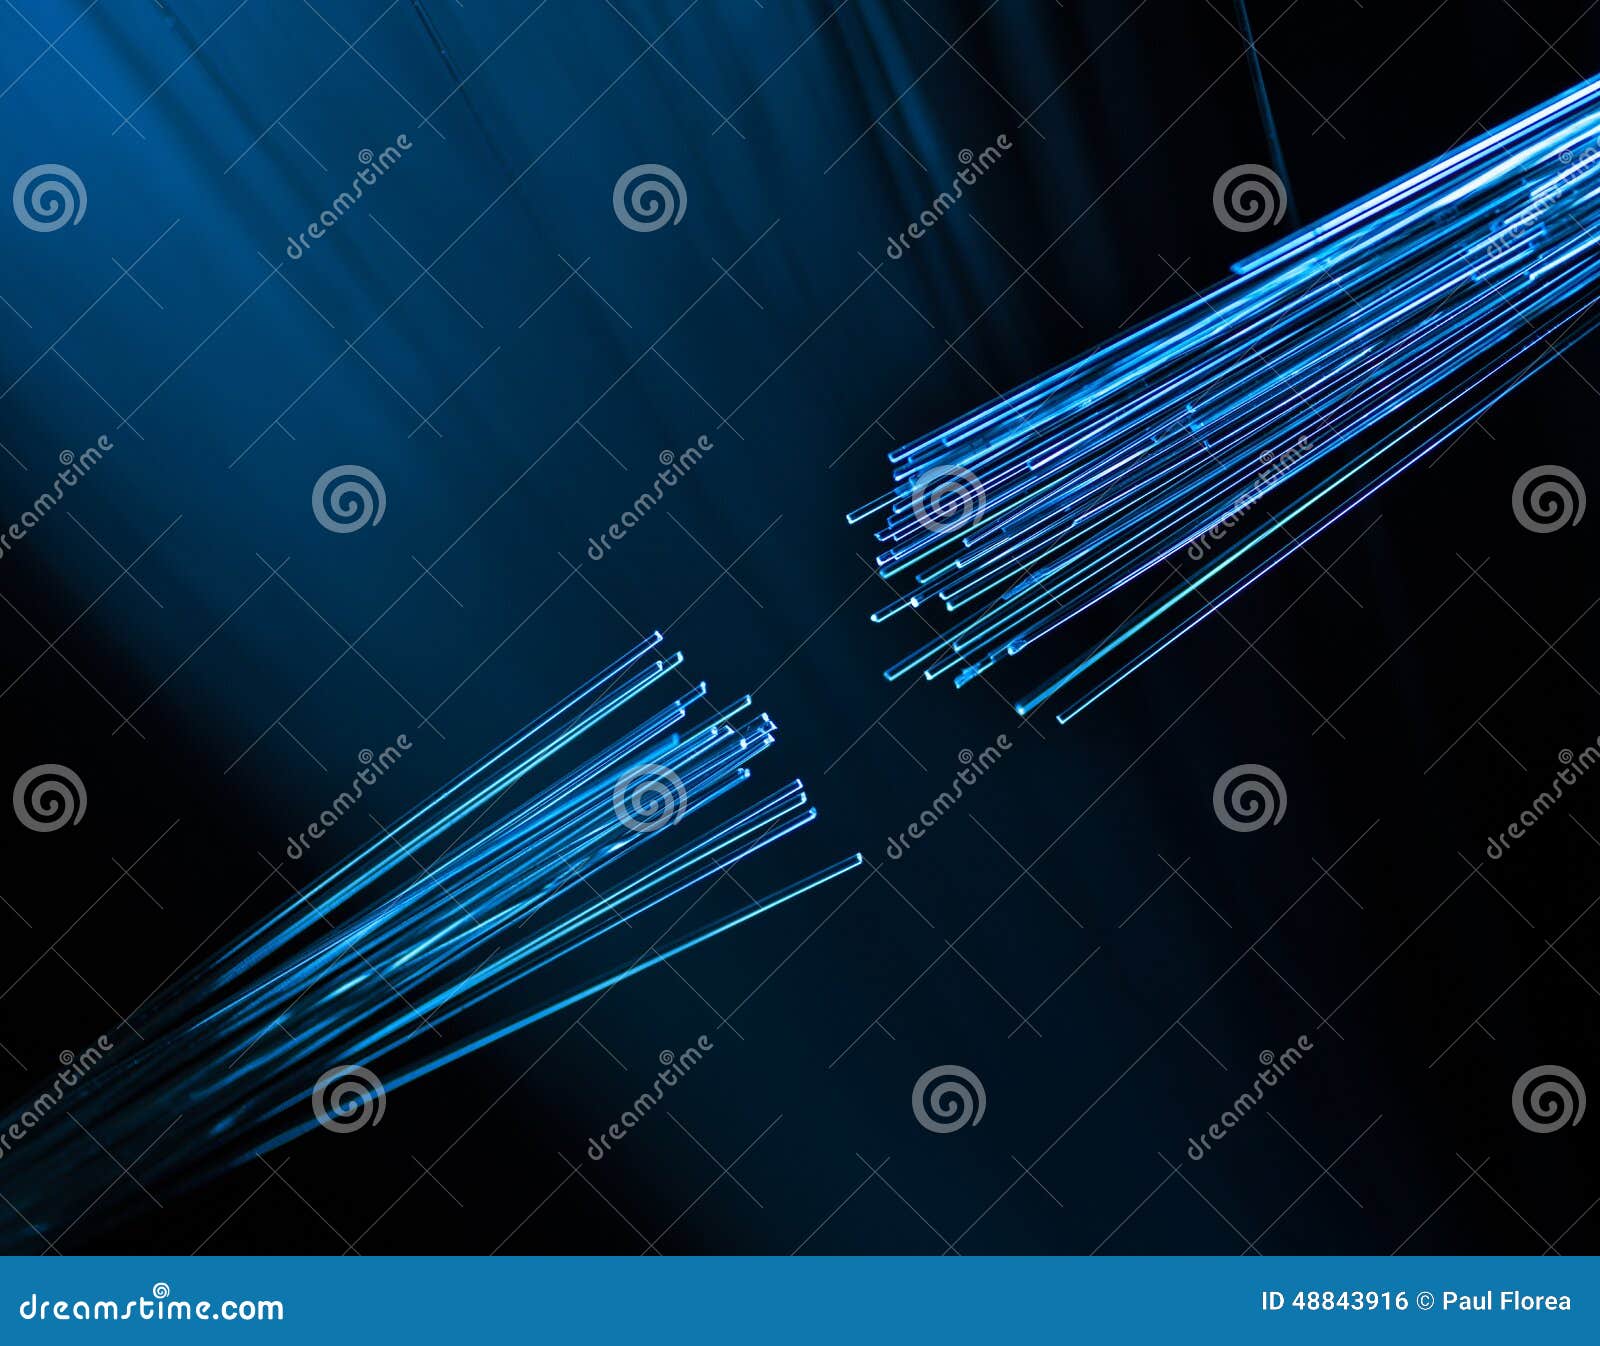 optic fiber cable connecting